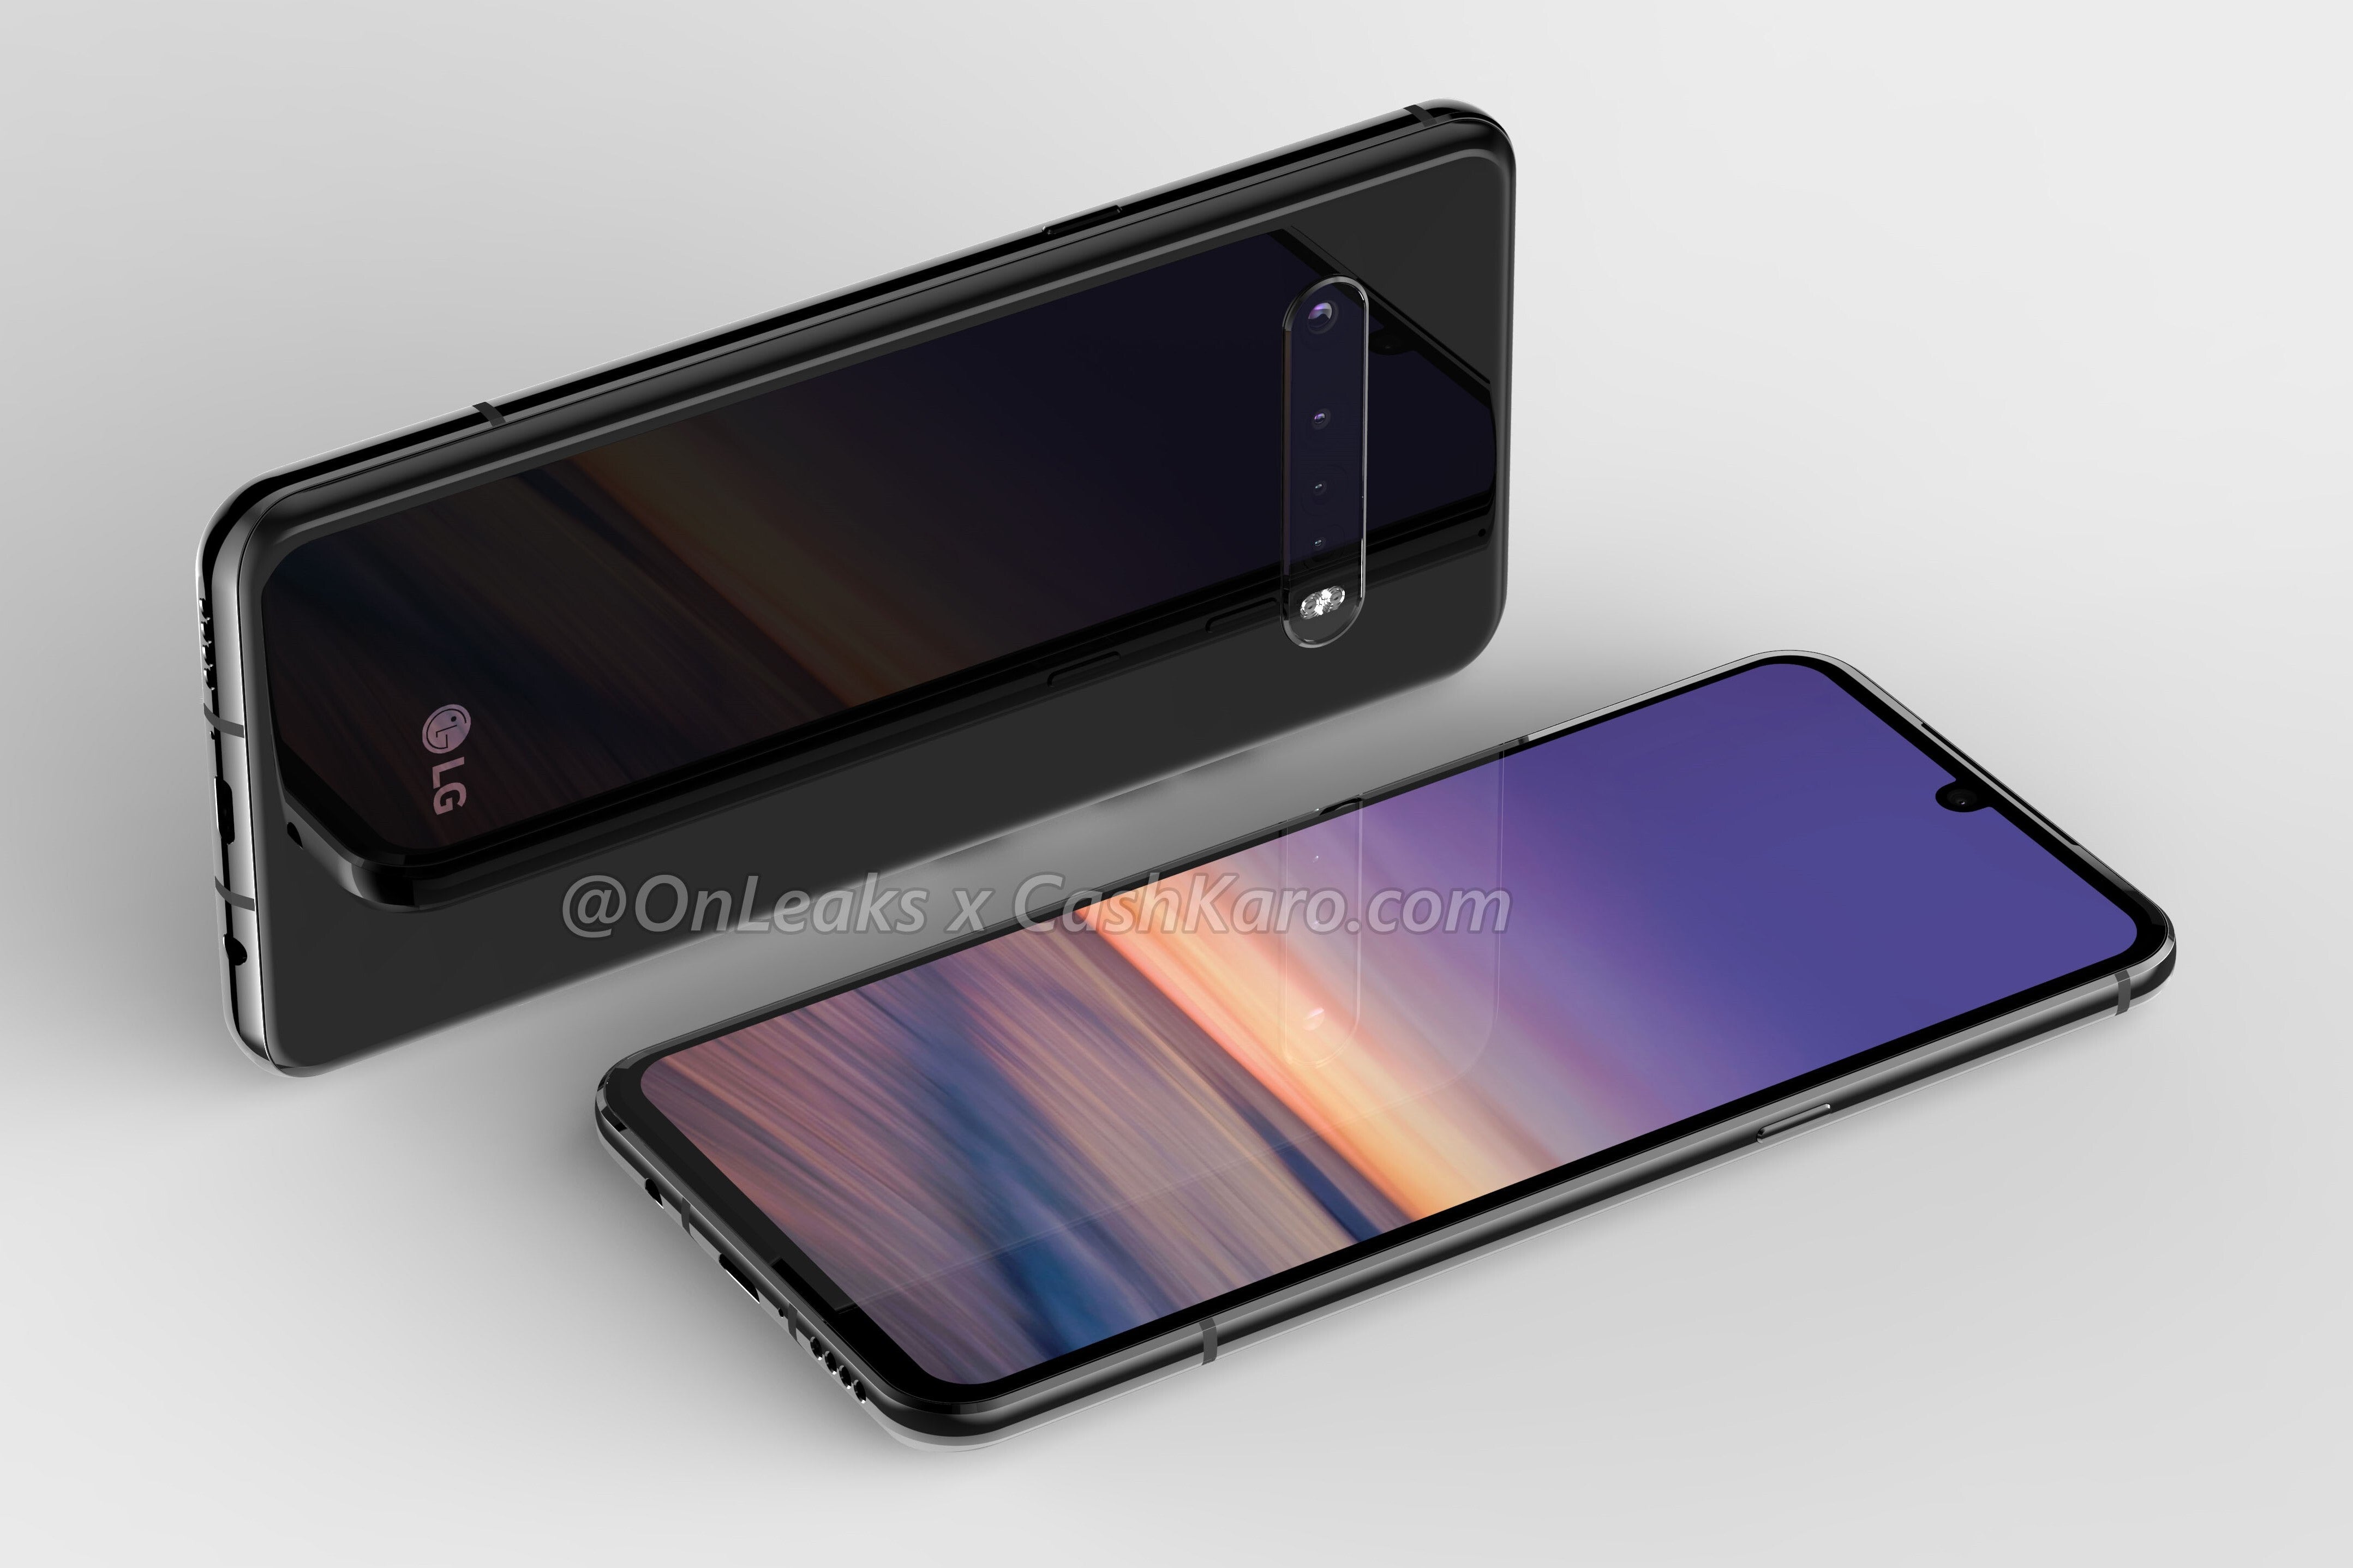 LG G9 ThinQ CAD-based render - The LG V60 and G9 ThinQ might be different versions of the same phone